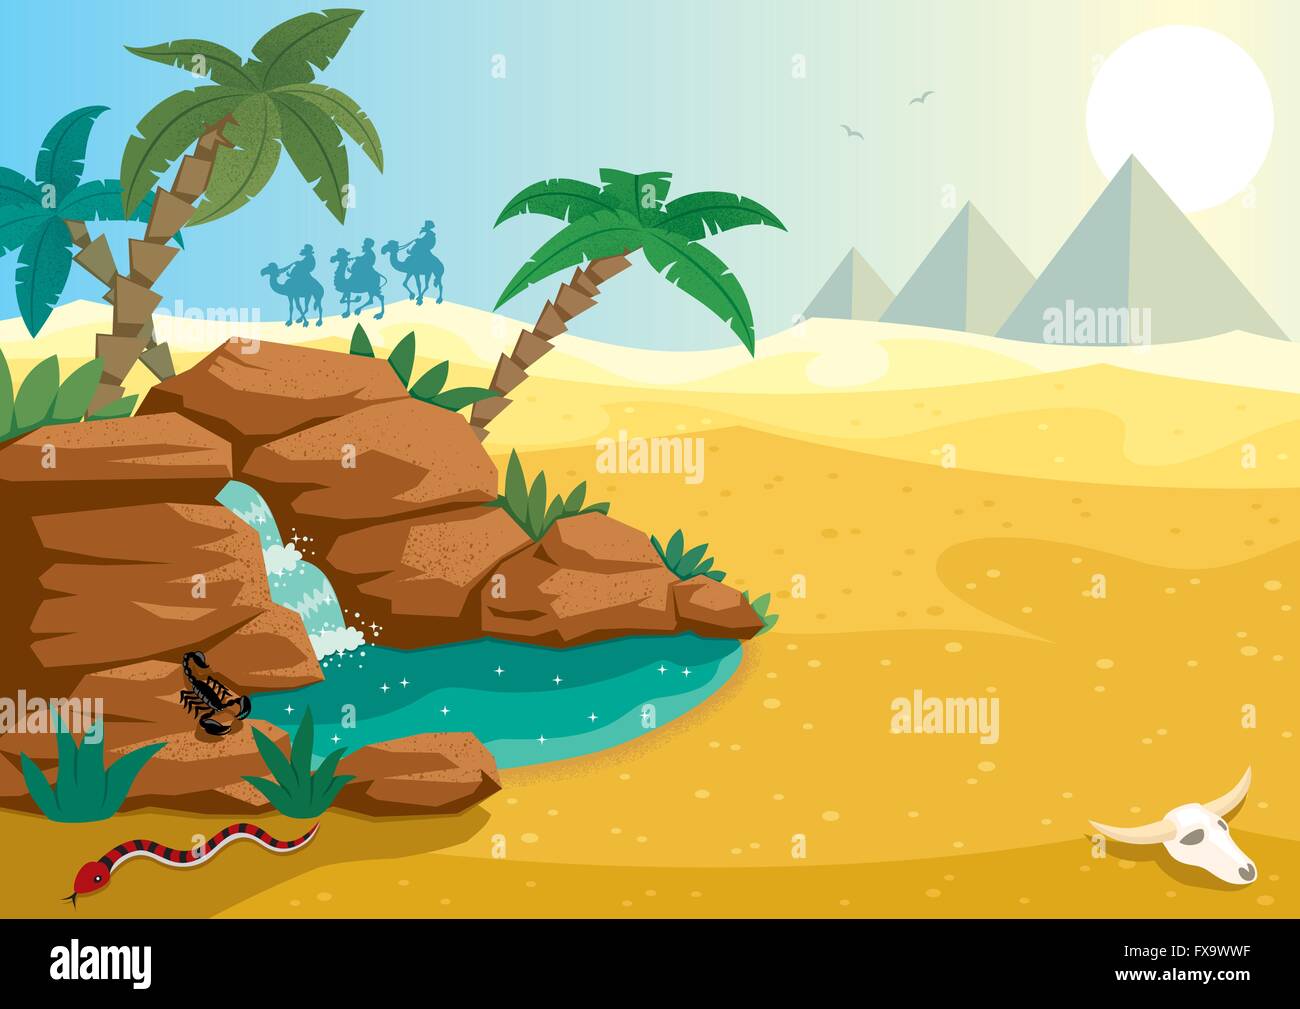 Cartoon illustration of small oasis in the Sahara desert. A4 proportions. Stock Vector